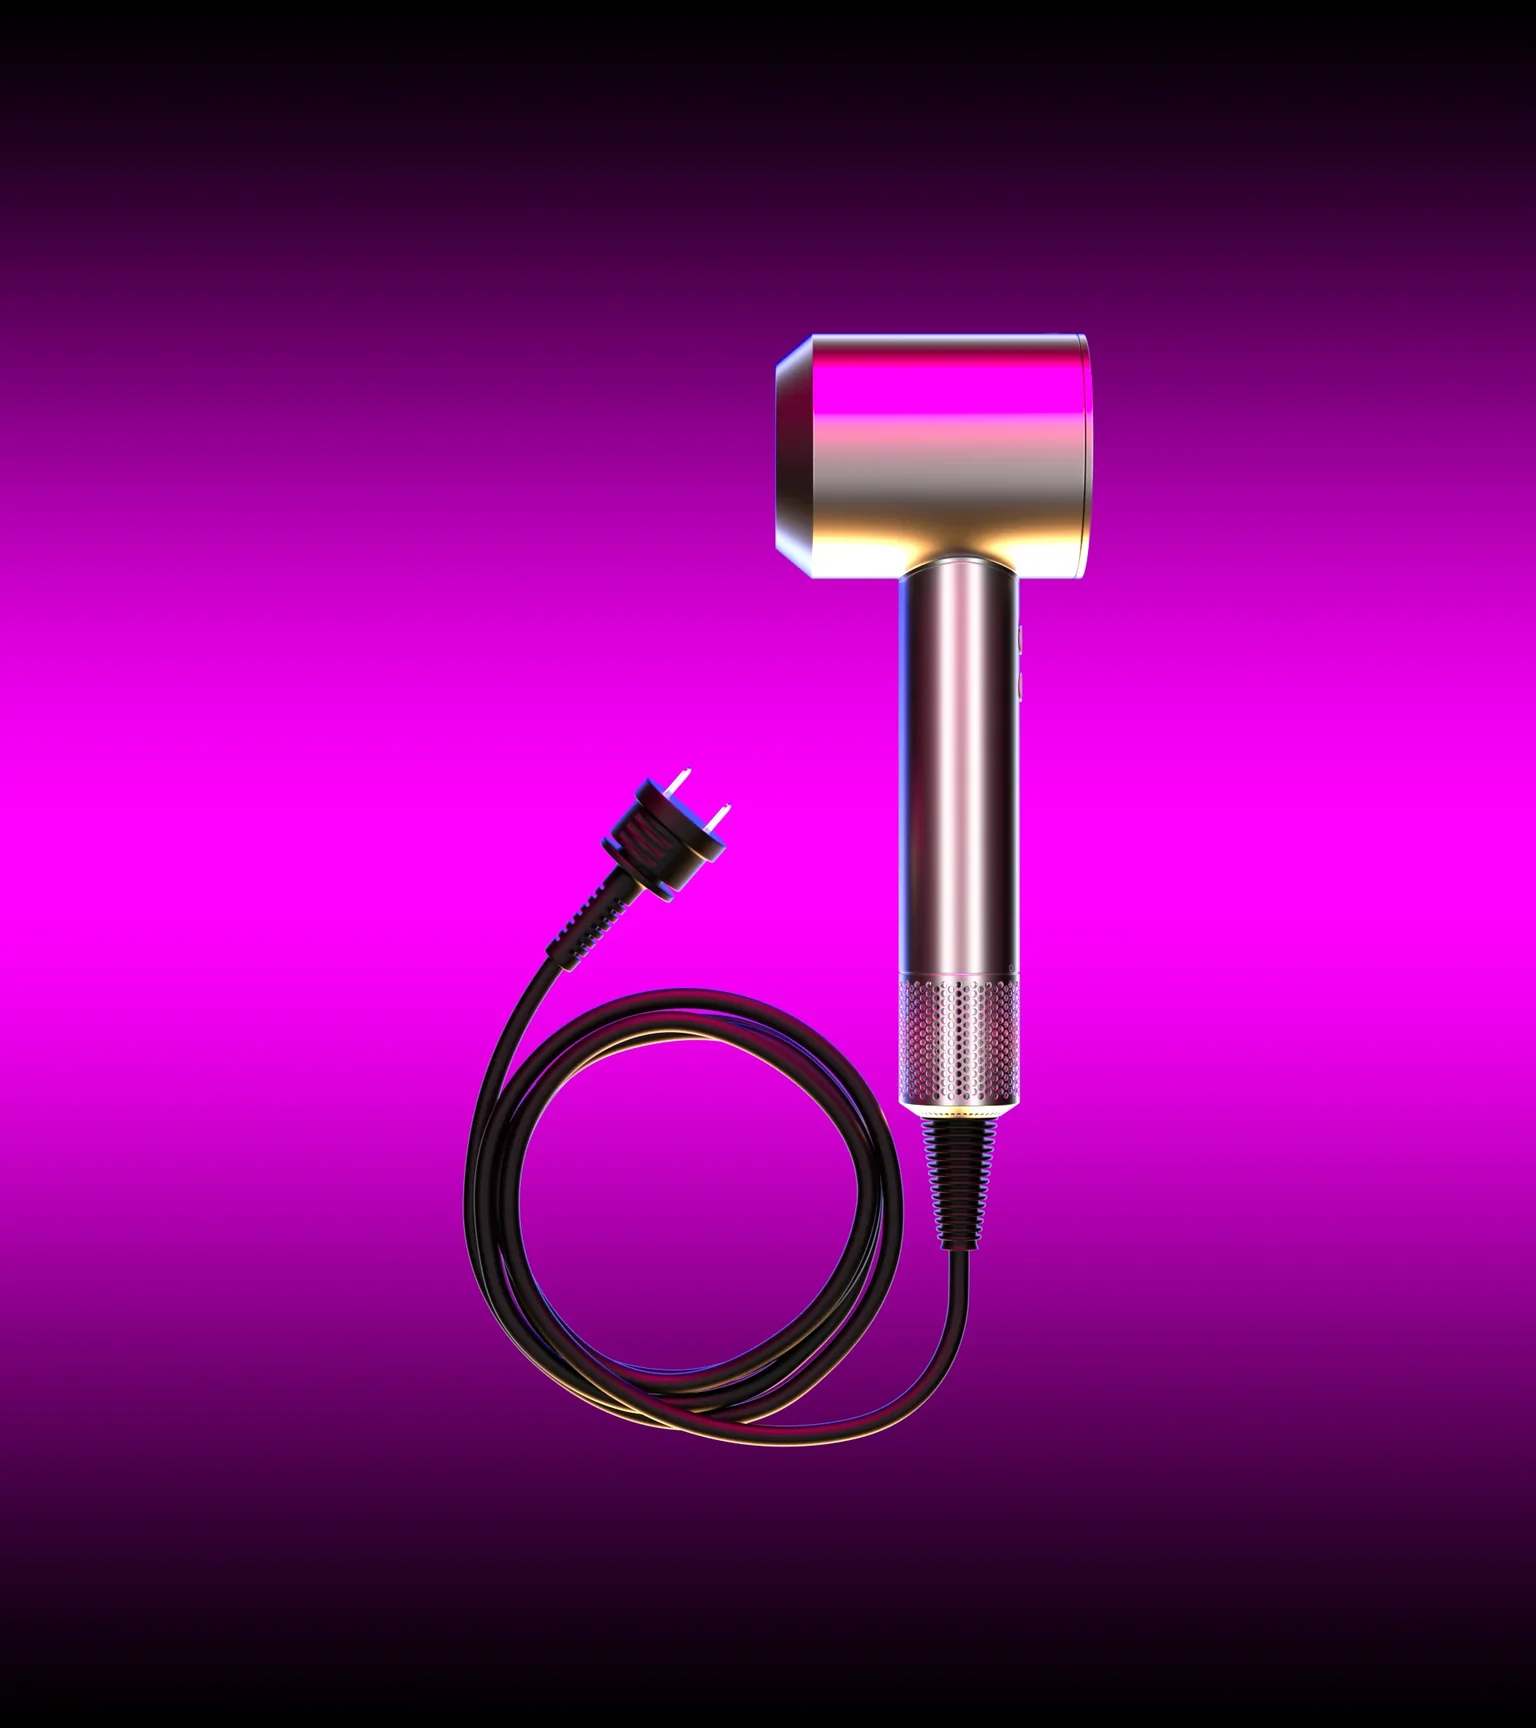 Pink gradient background with 3D rendering of a Dyson hair dryer.